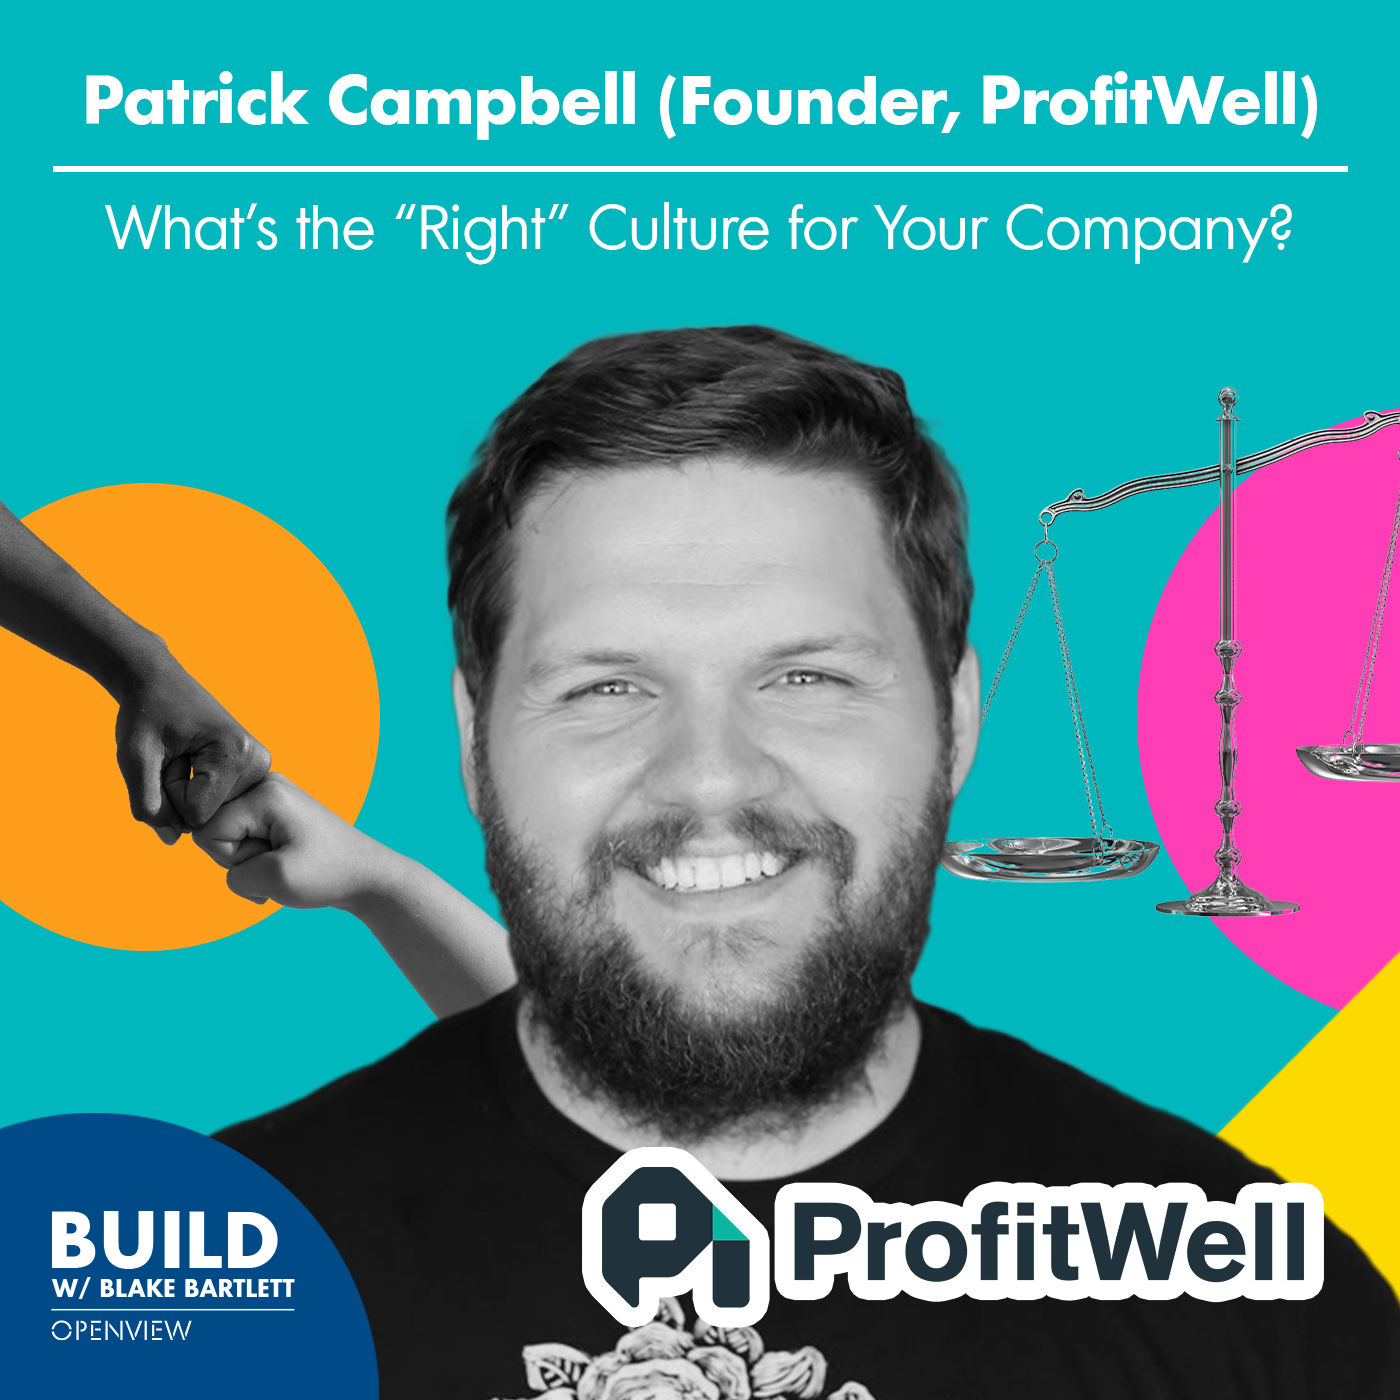 Patrick Campbell (ProfitWell): What’s the “Right” Culture for Your Company?